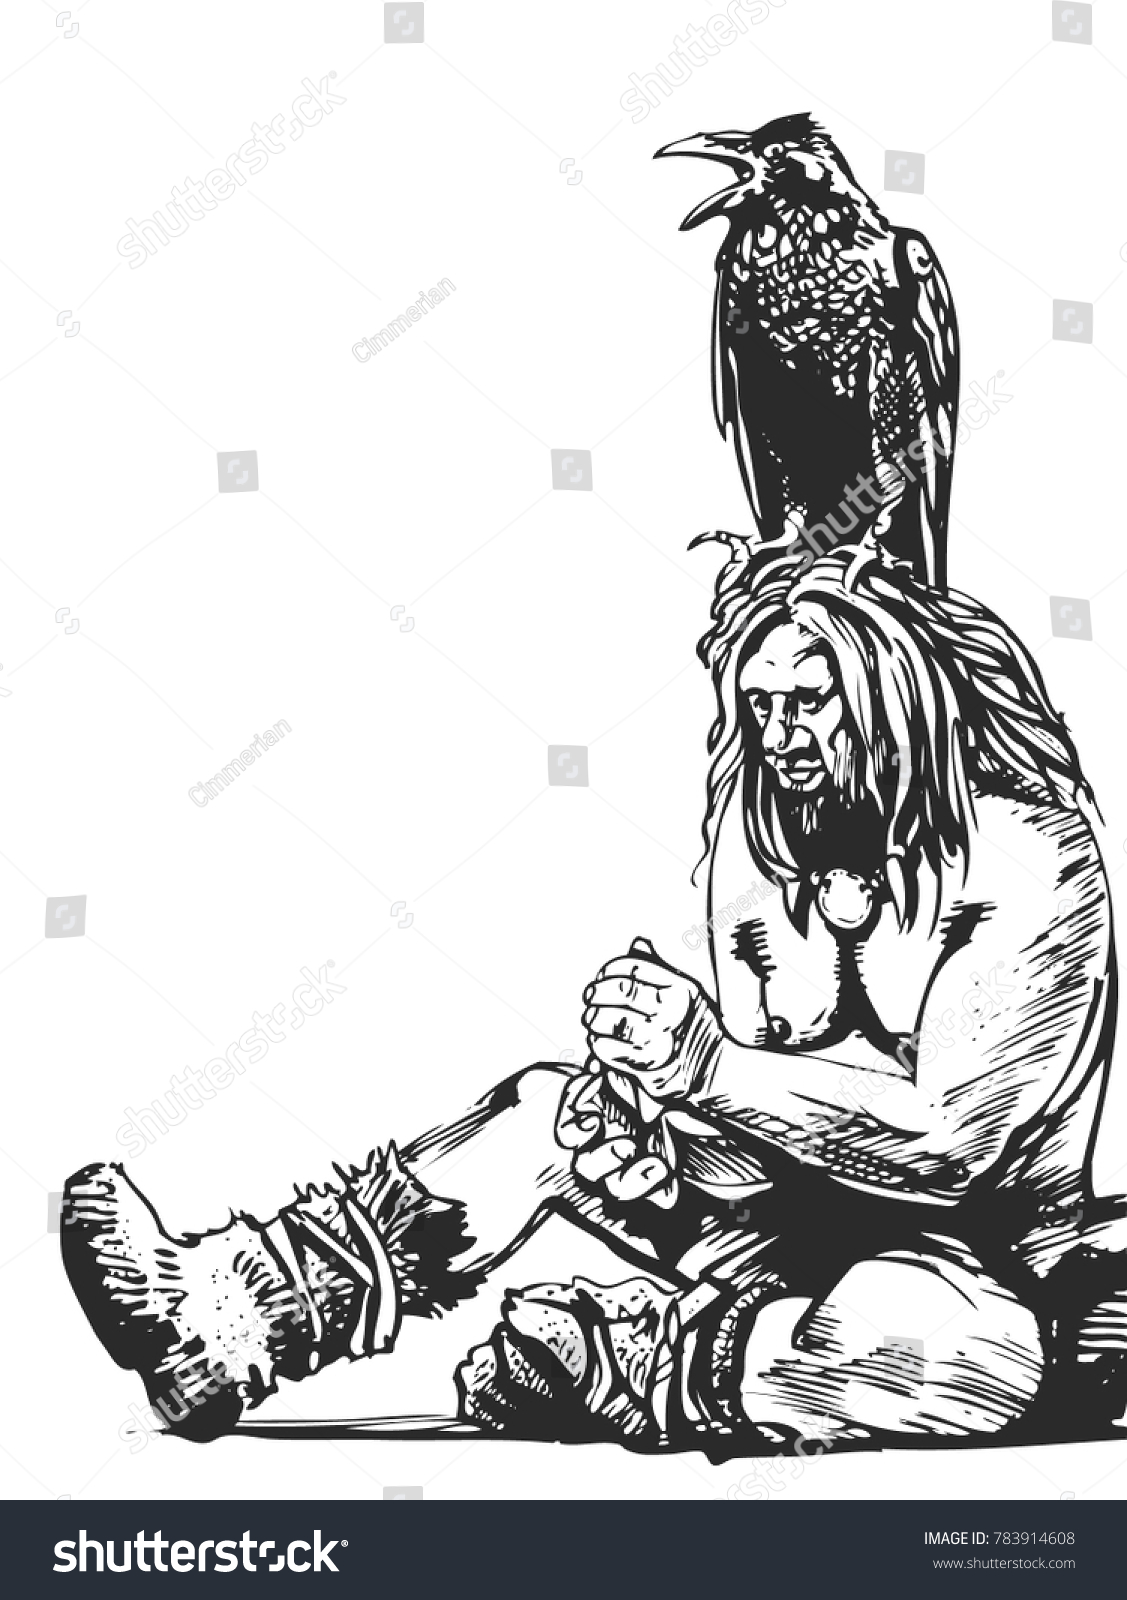 SVG of Cro-Magnon man with crow. Graphic sketch. In the same portfolio there is a color version. svg